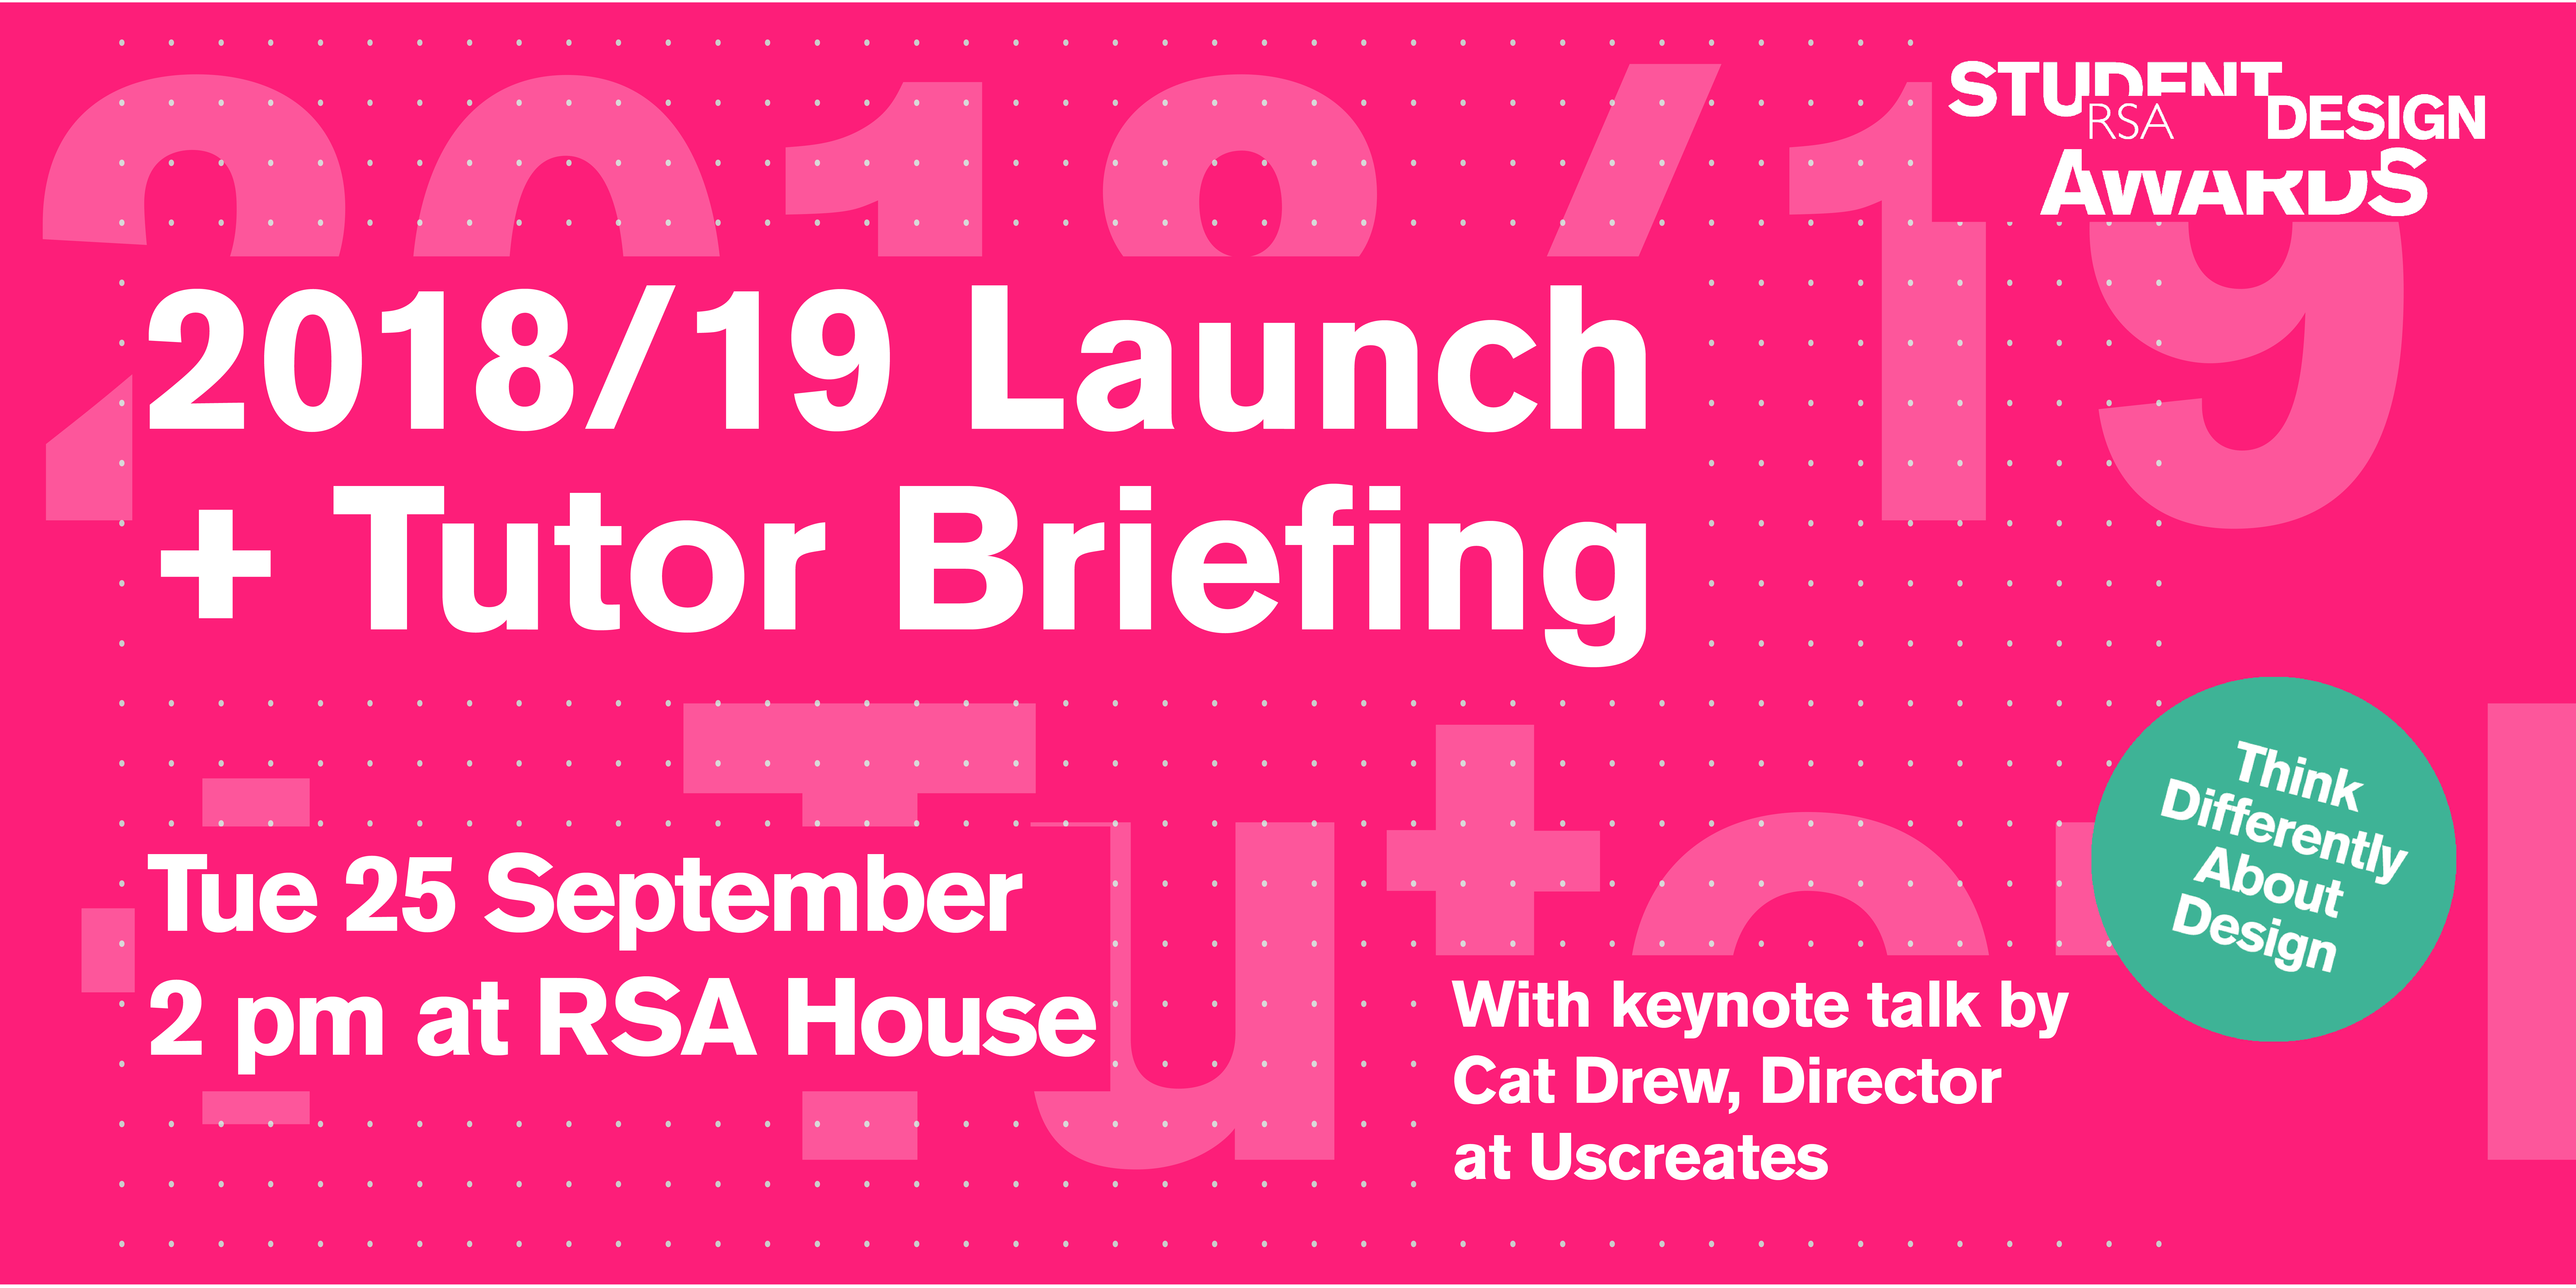 Launch and tutor briefing announcement